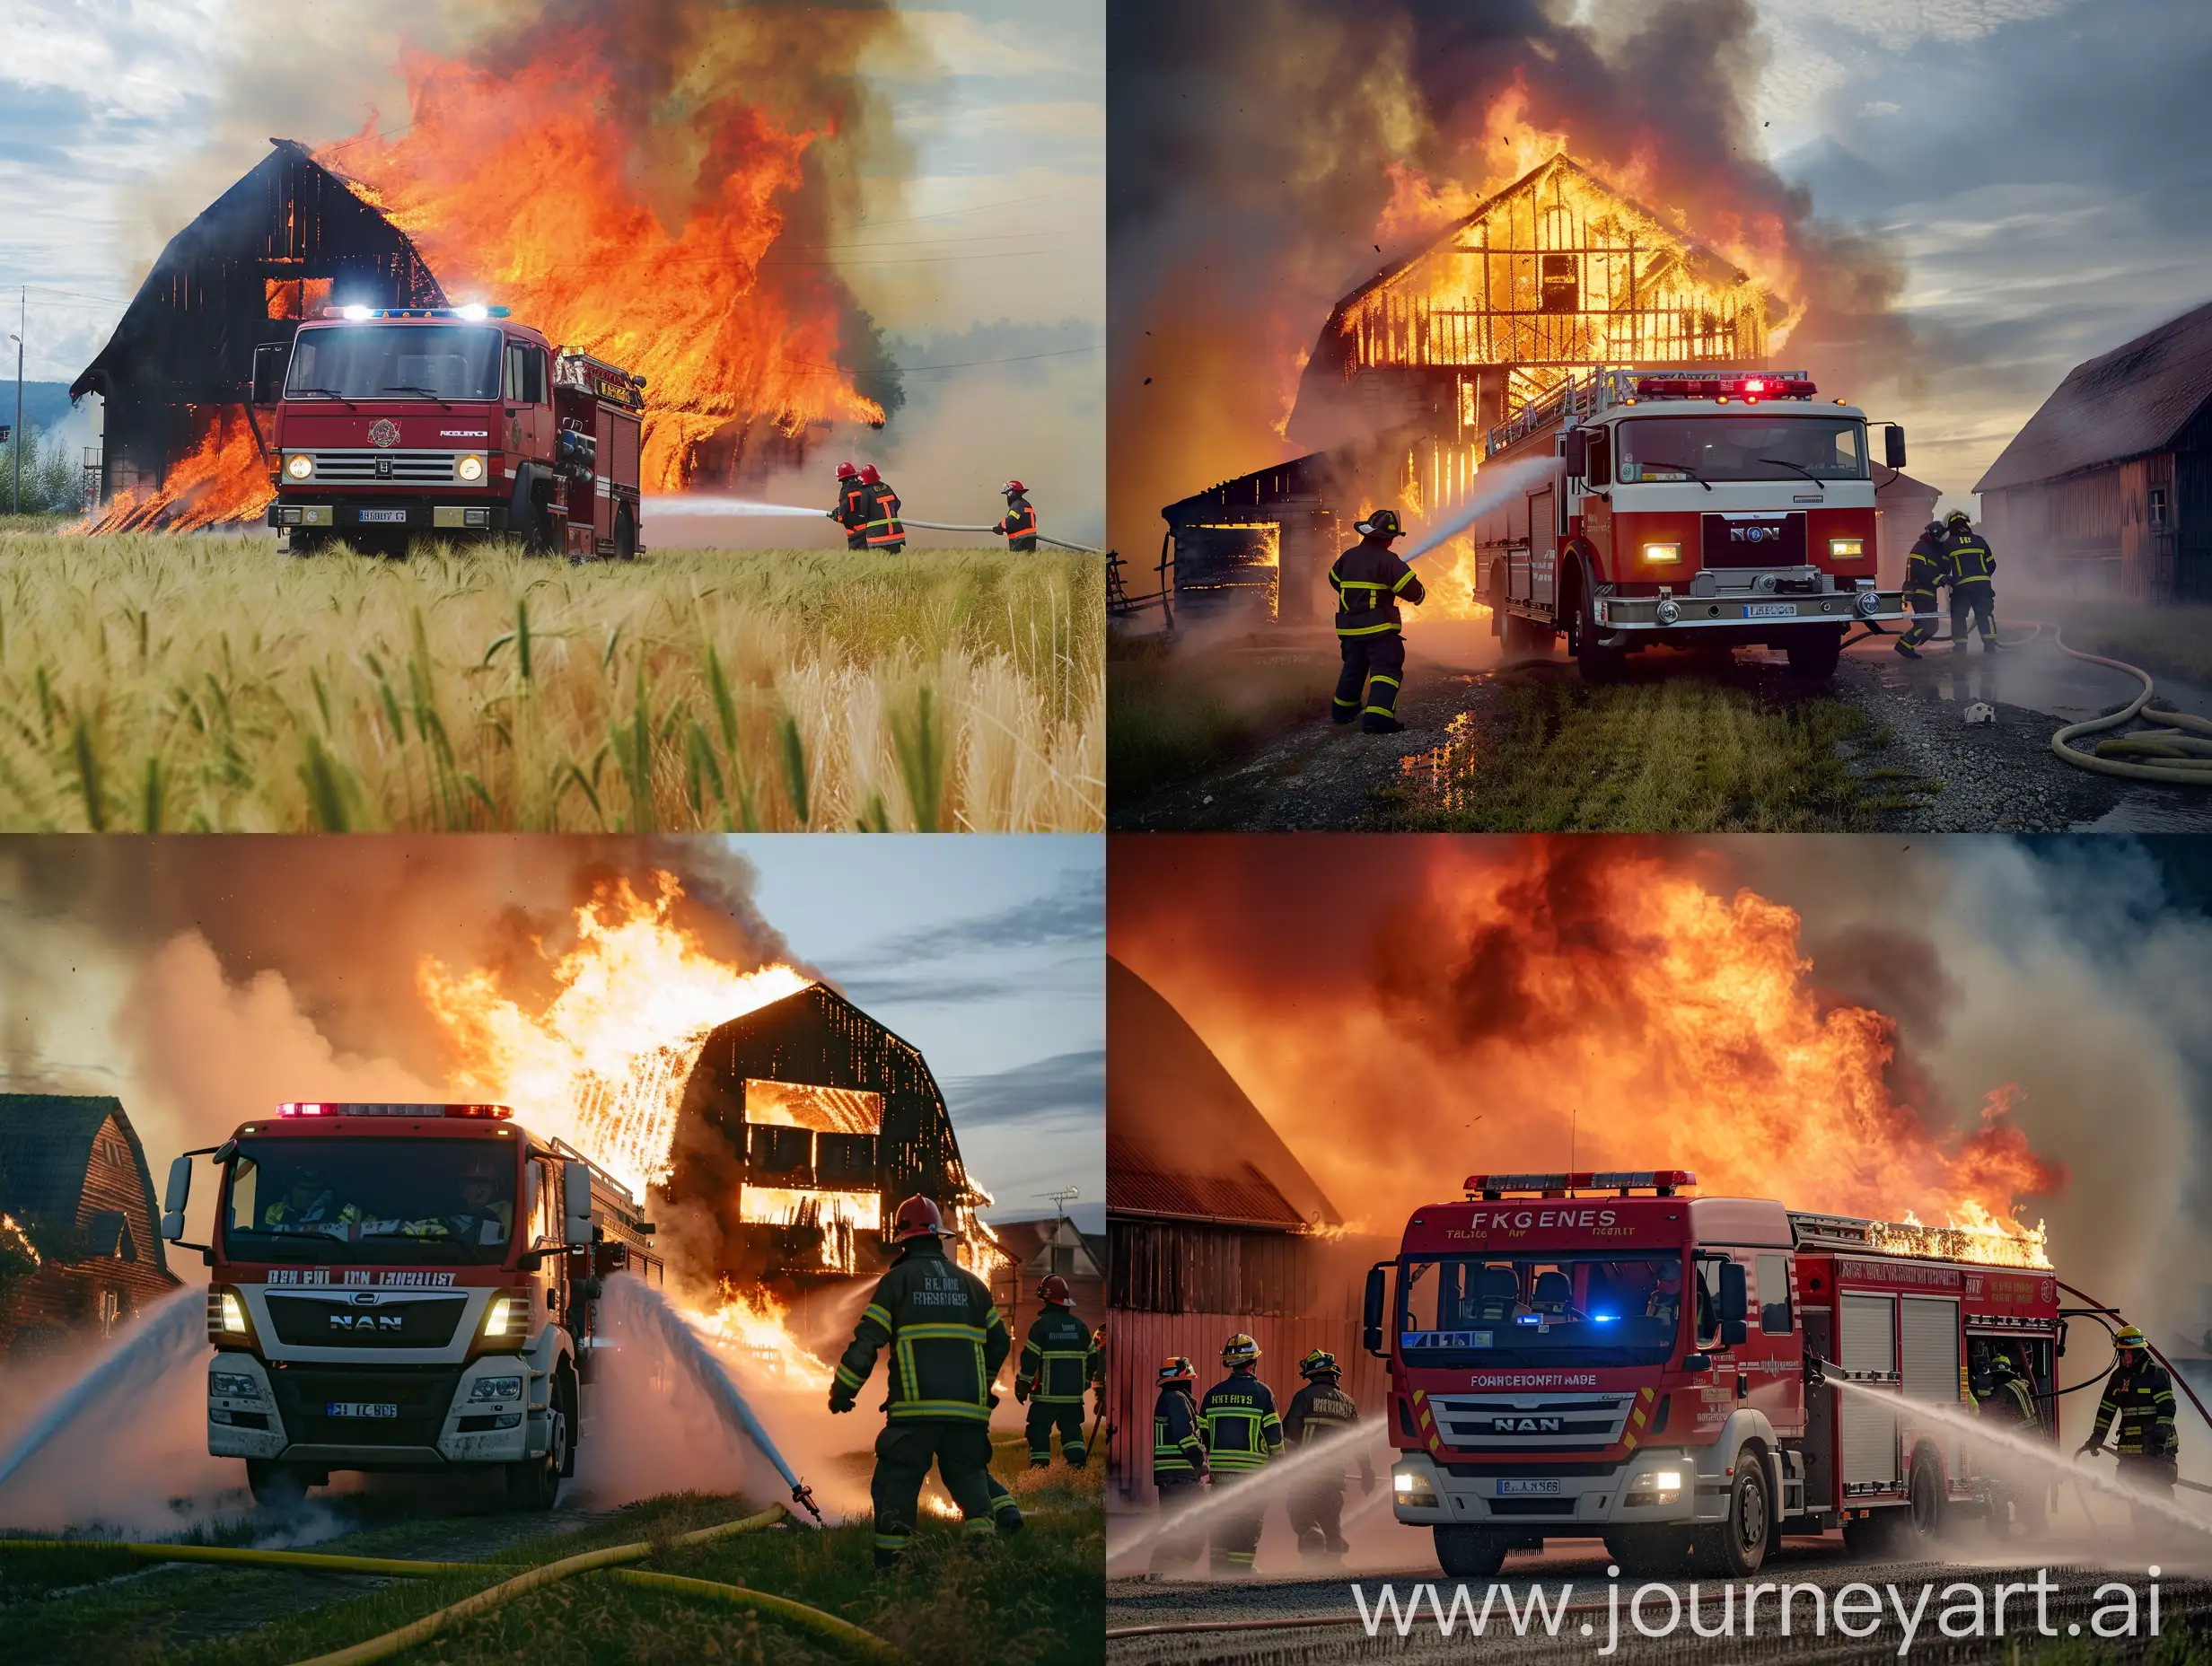 Generate realistic photo of firemen, Slovenian firetruck, no license plates, putting down fire on a mid large barn, rescuing people, daylight